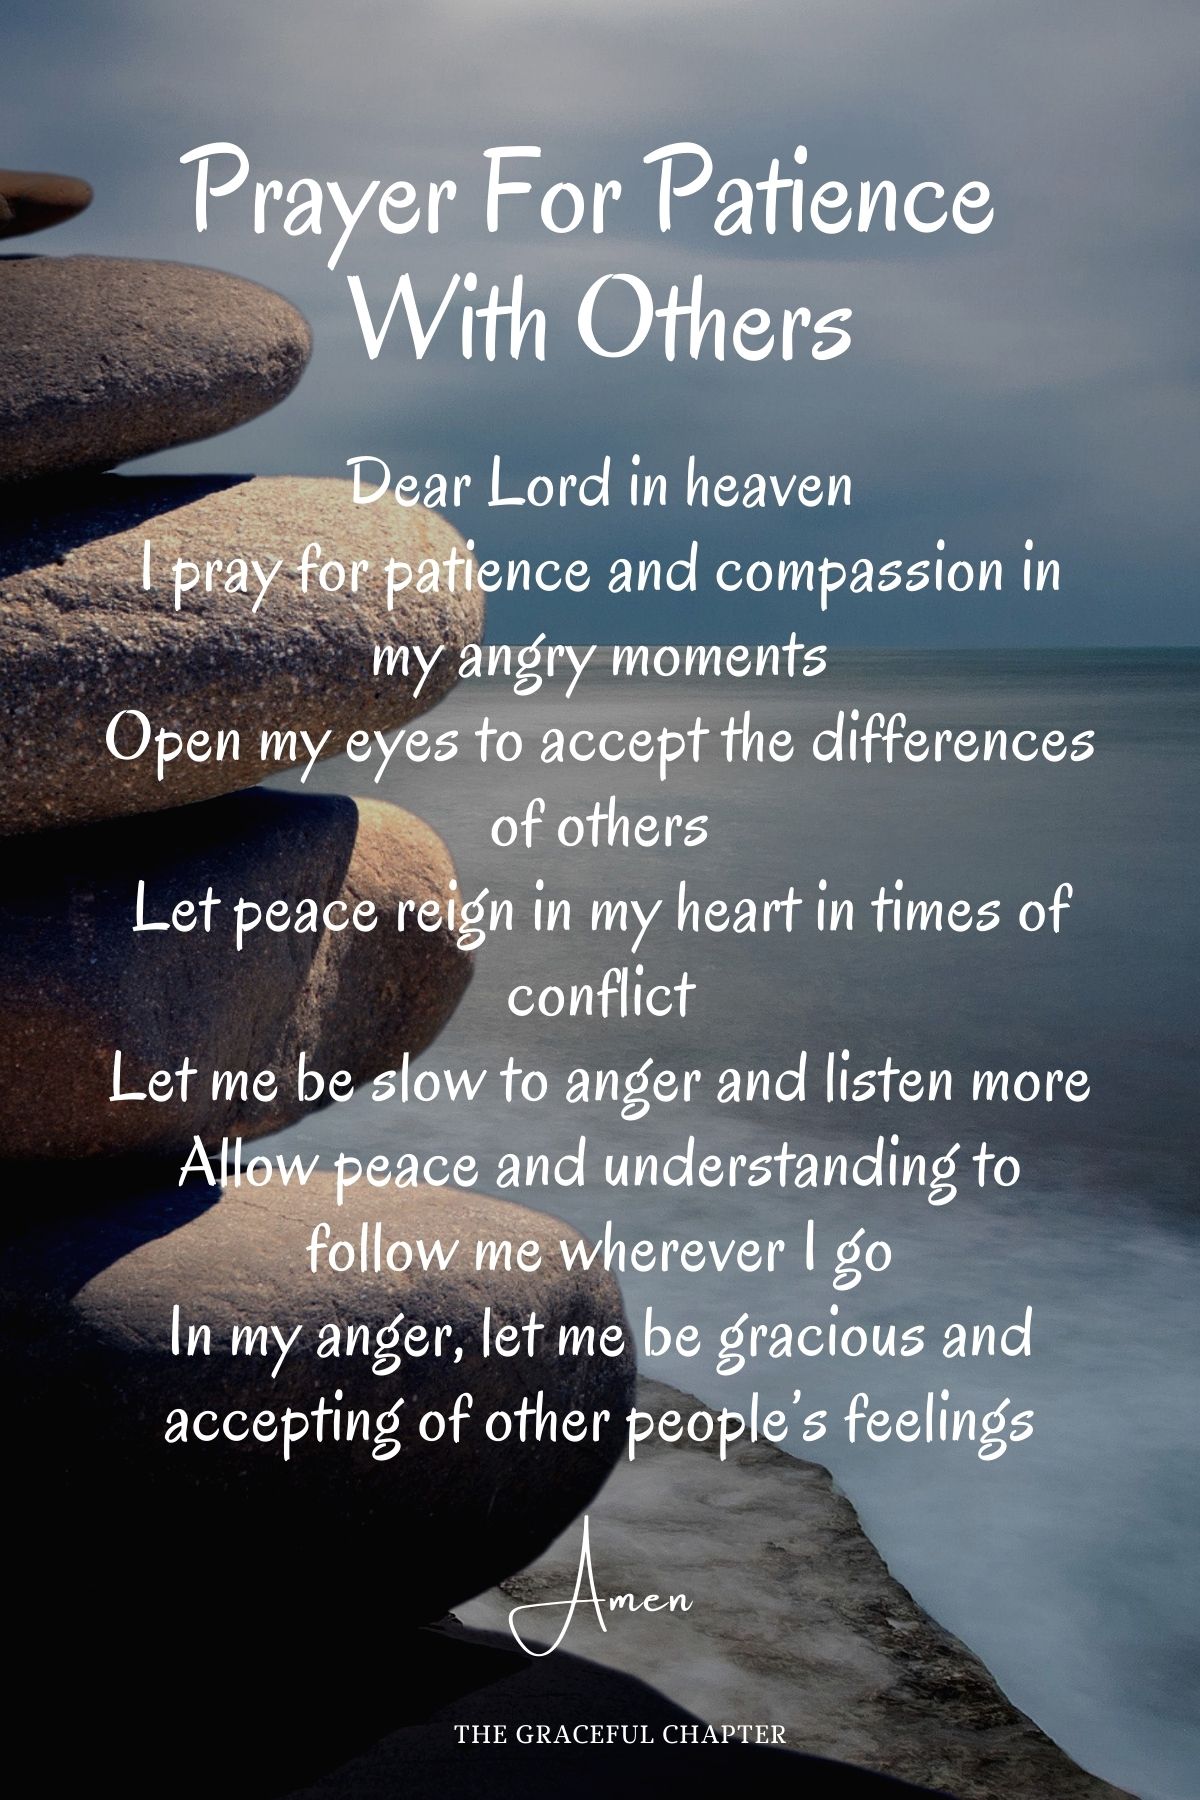 Prayer for patience with others